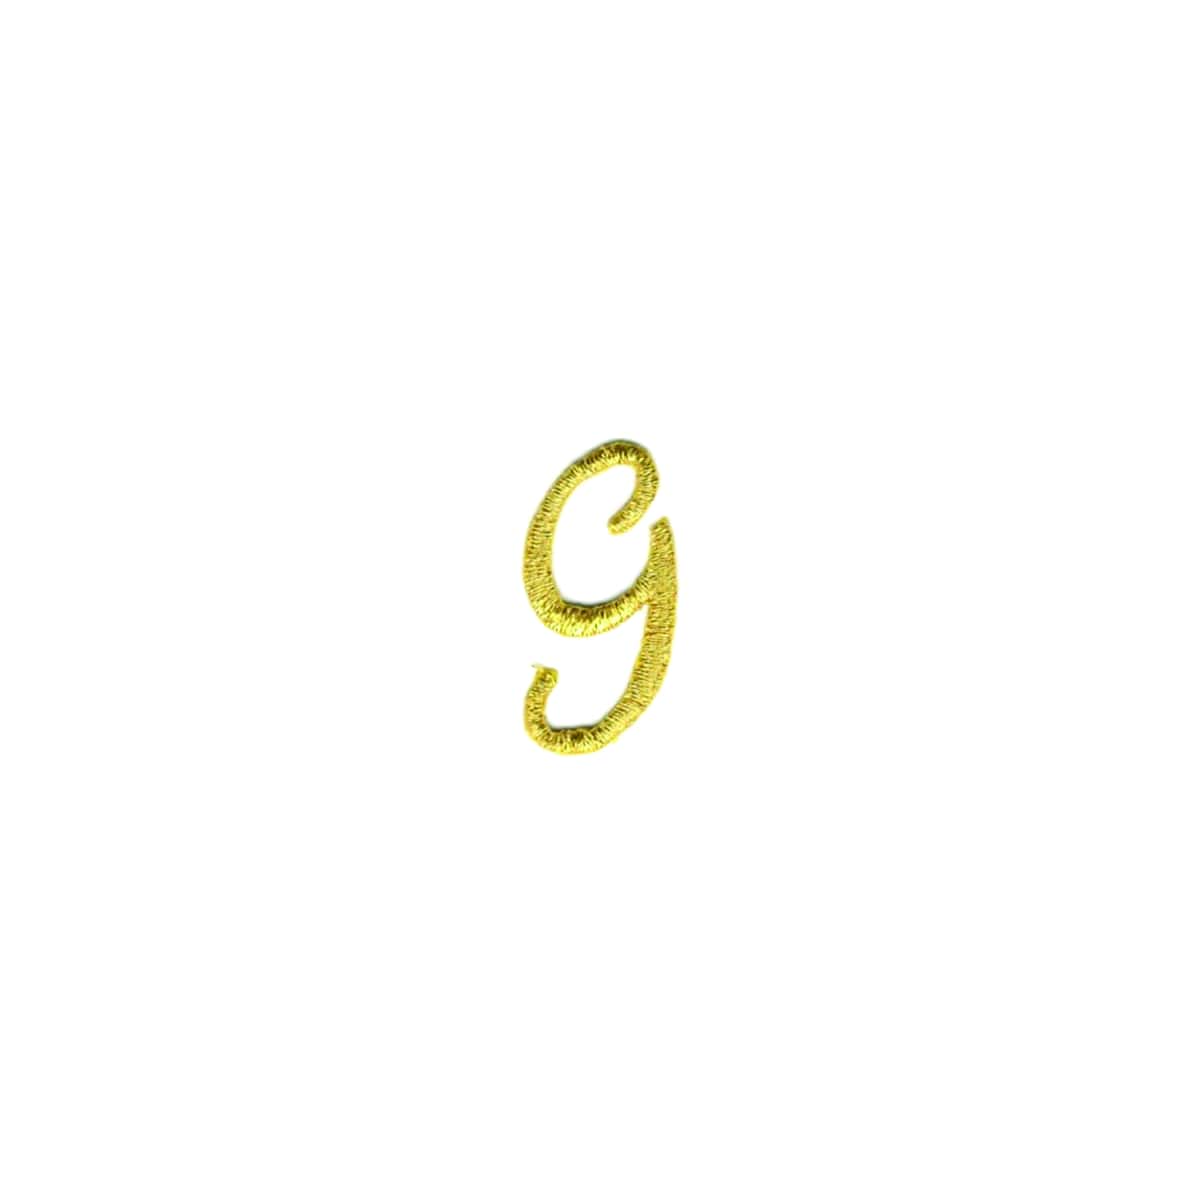 Metallic Gold Script Letter G Cut Out Iron On Patch - B&B Accessories